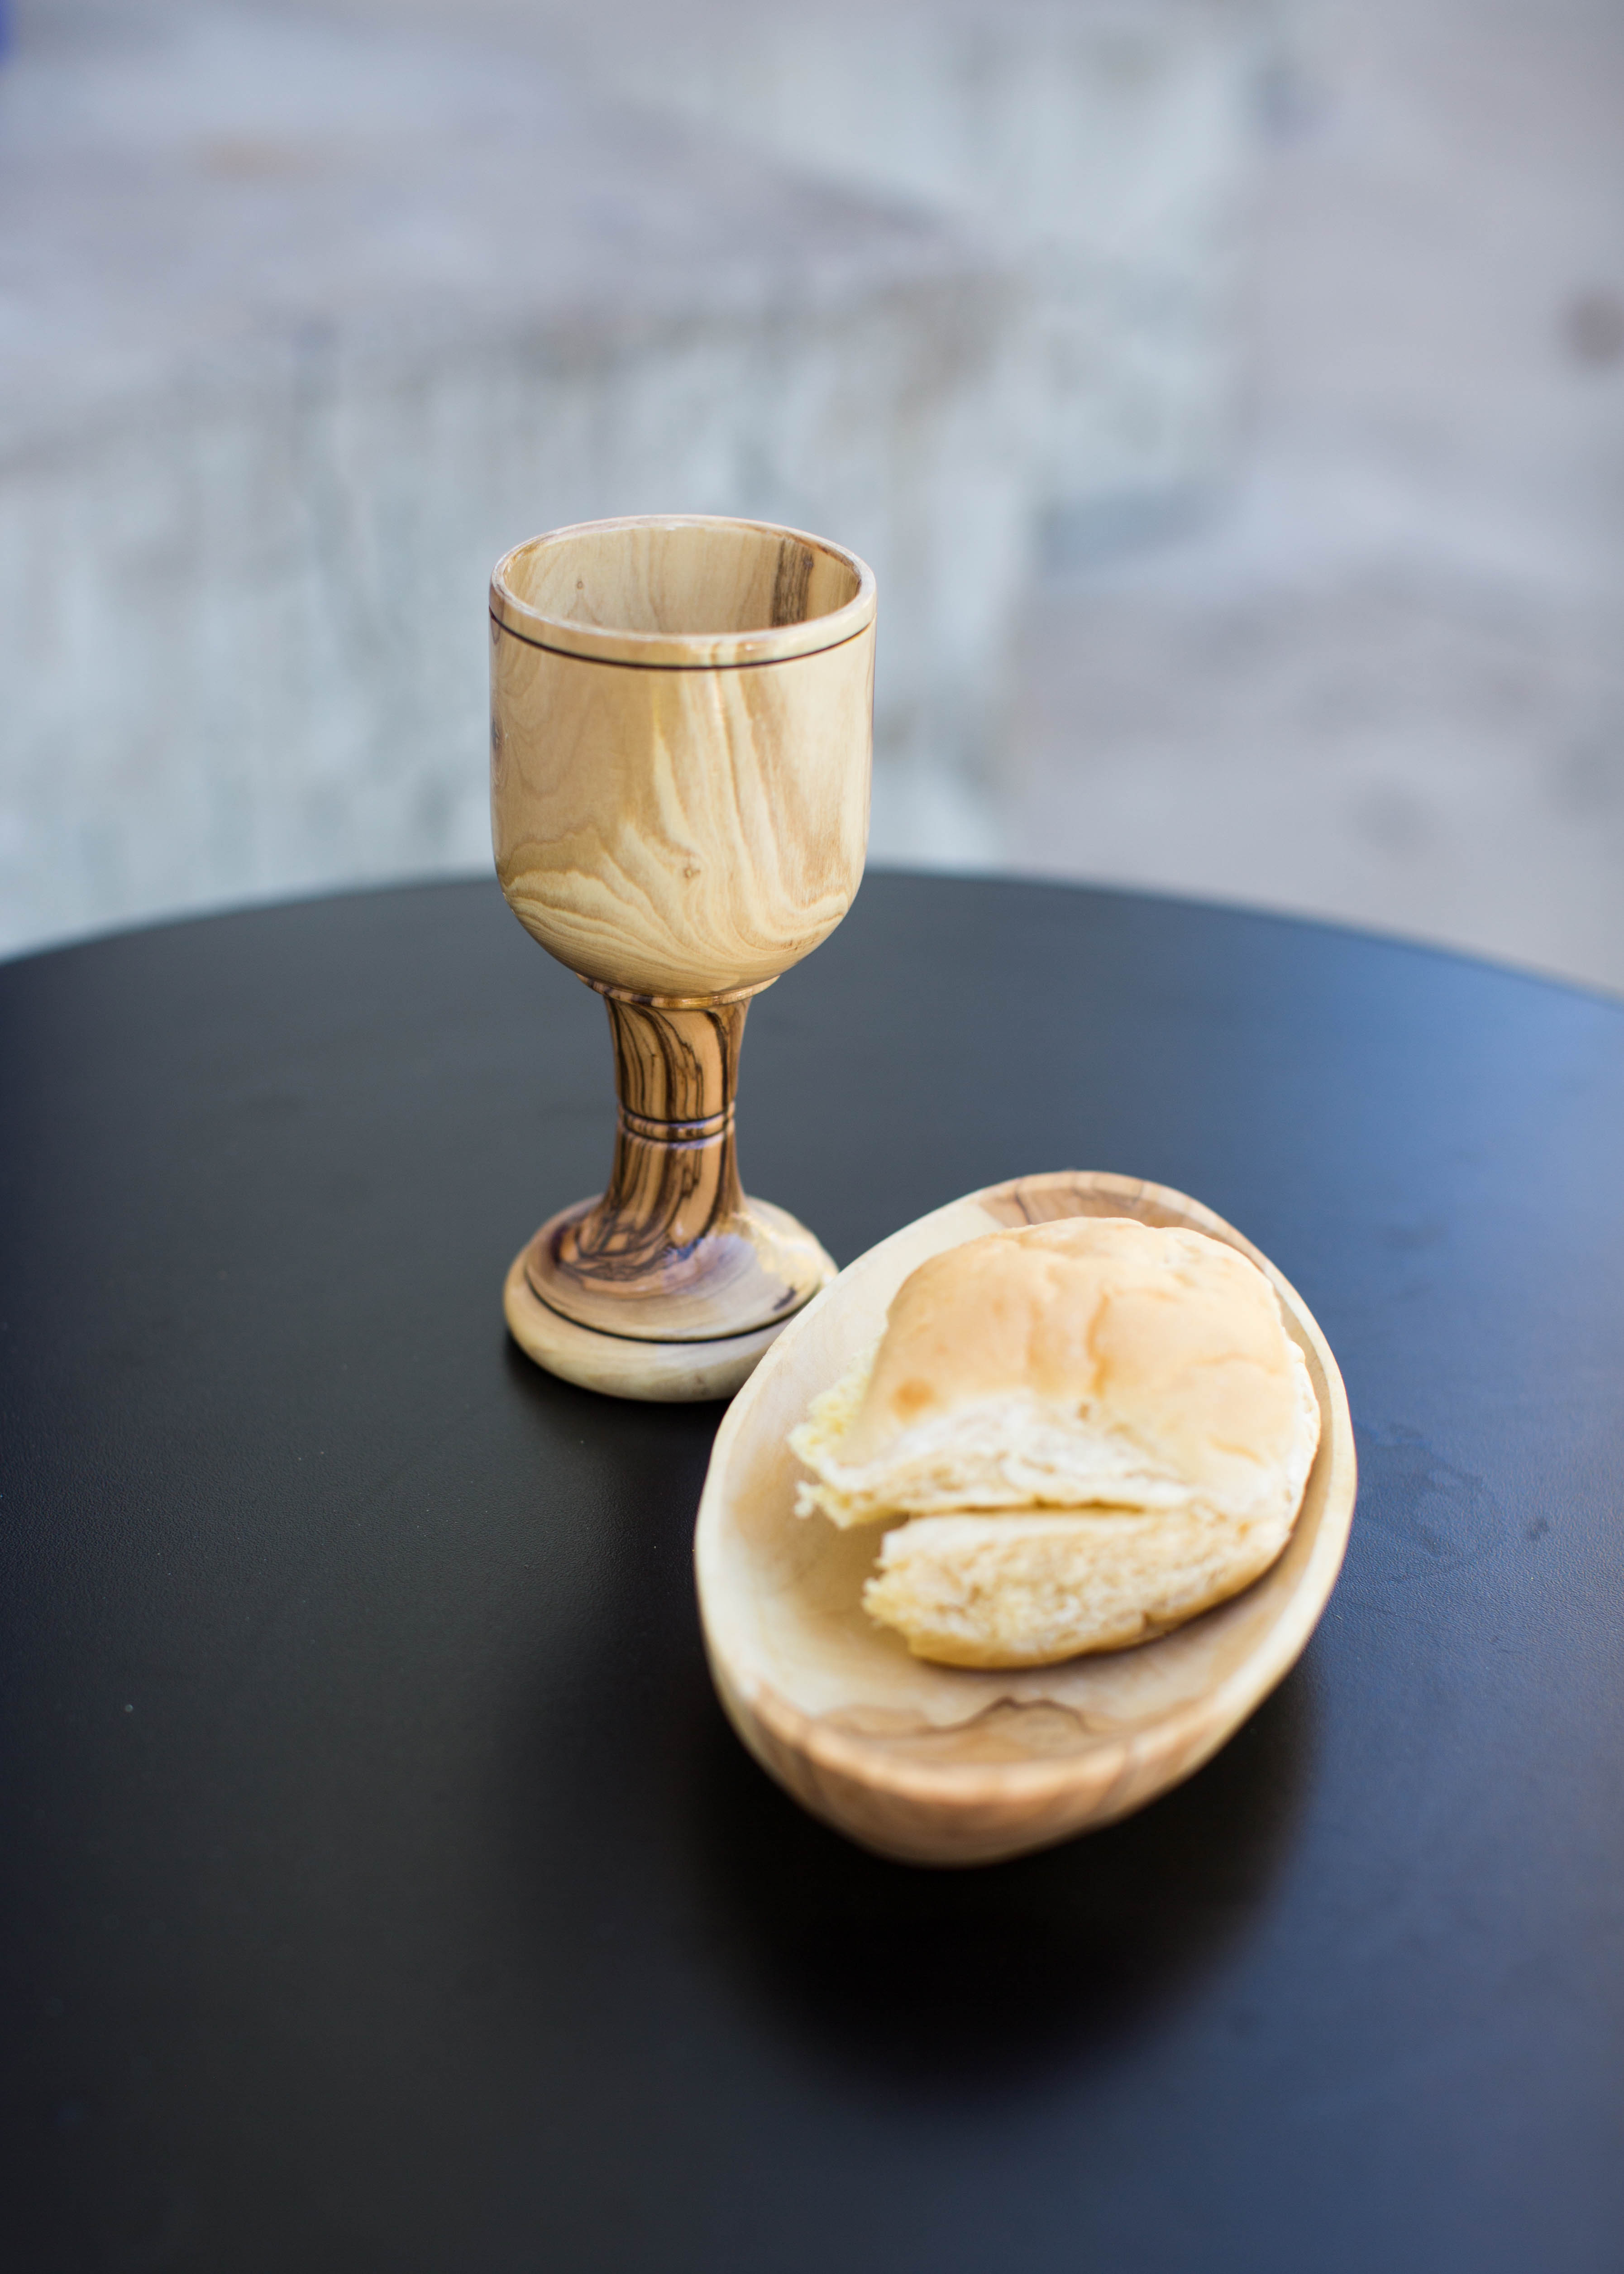 wooden communion cup and plate